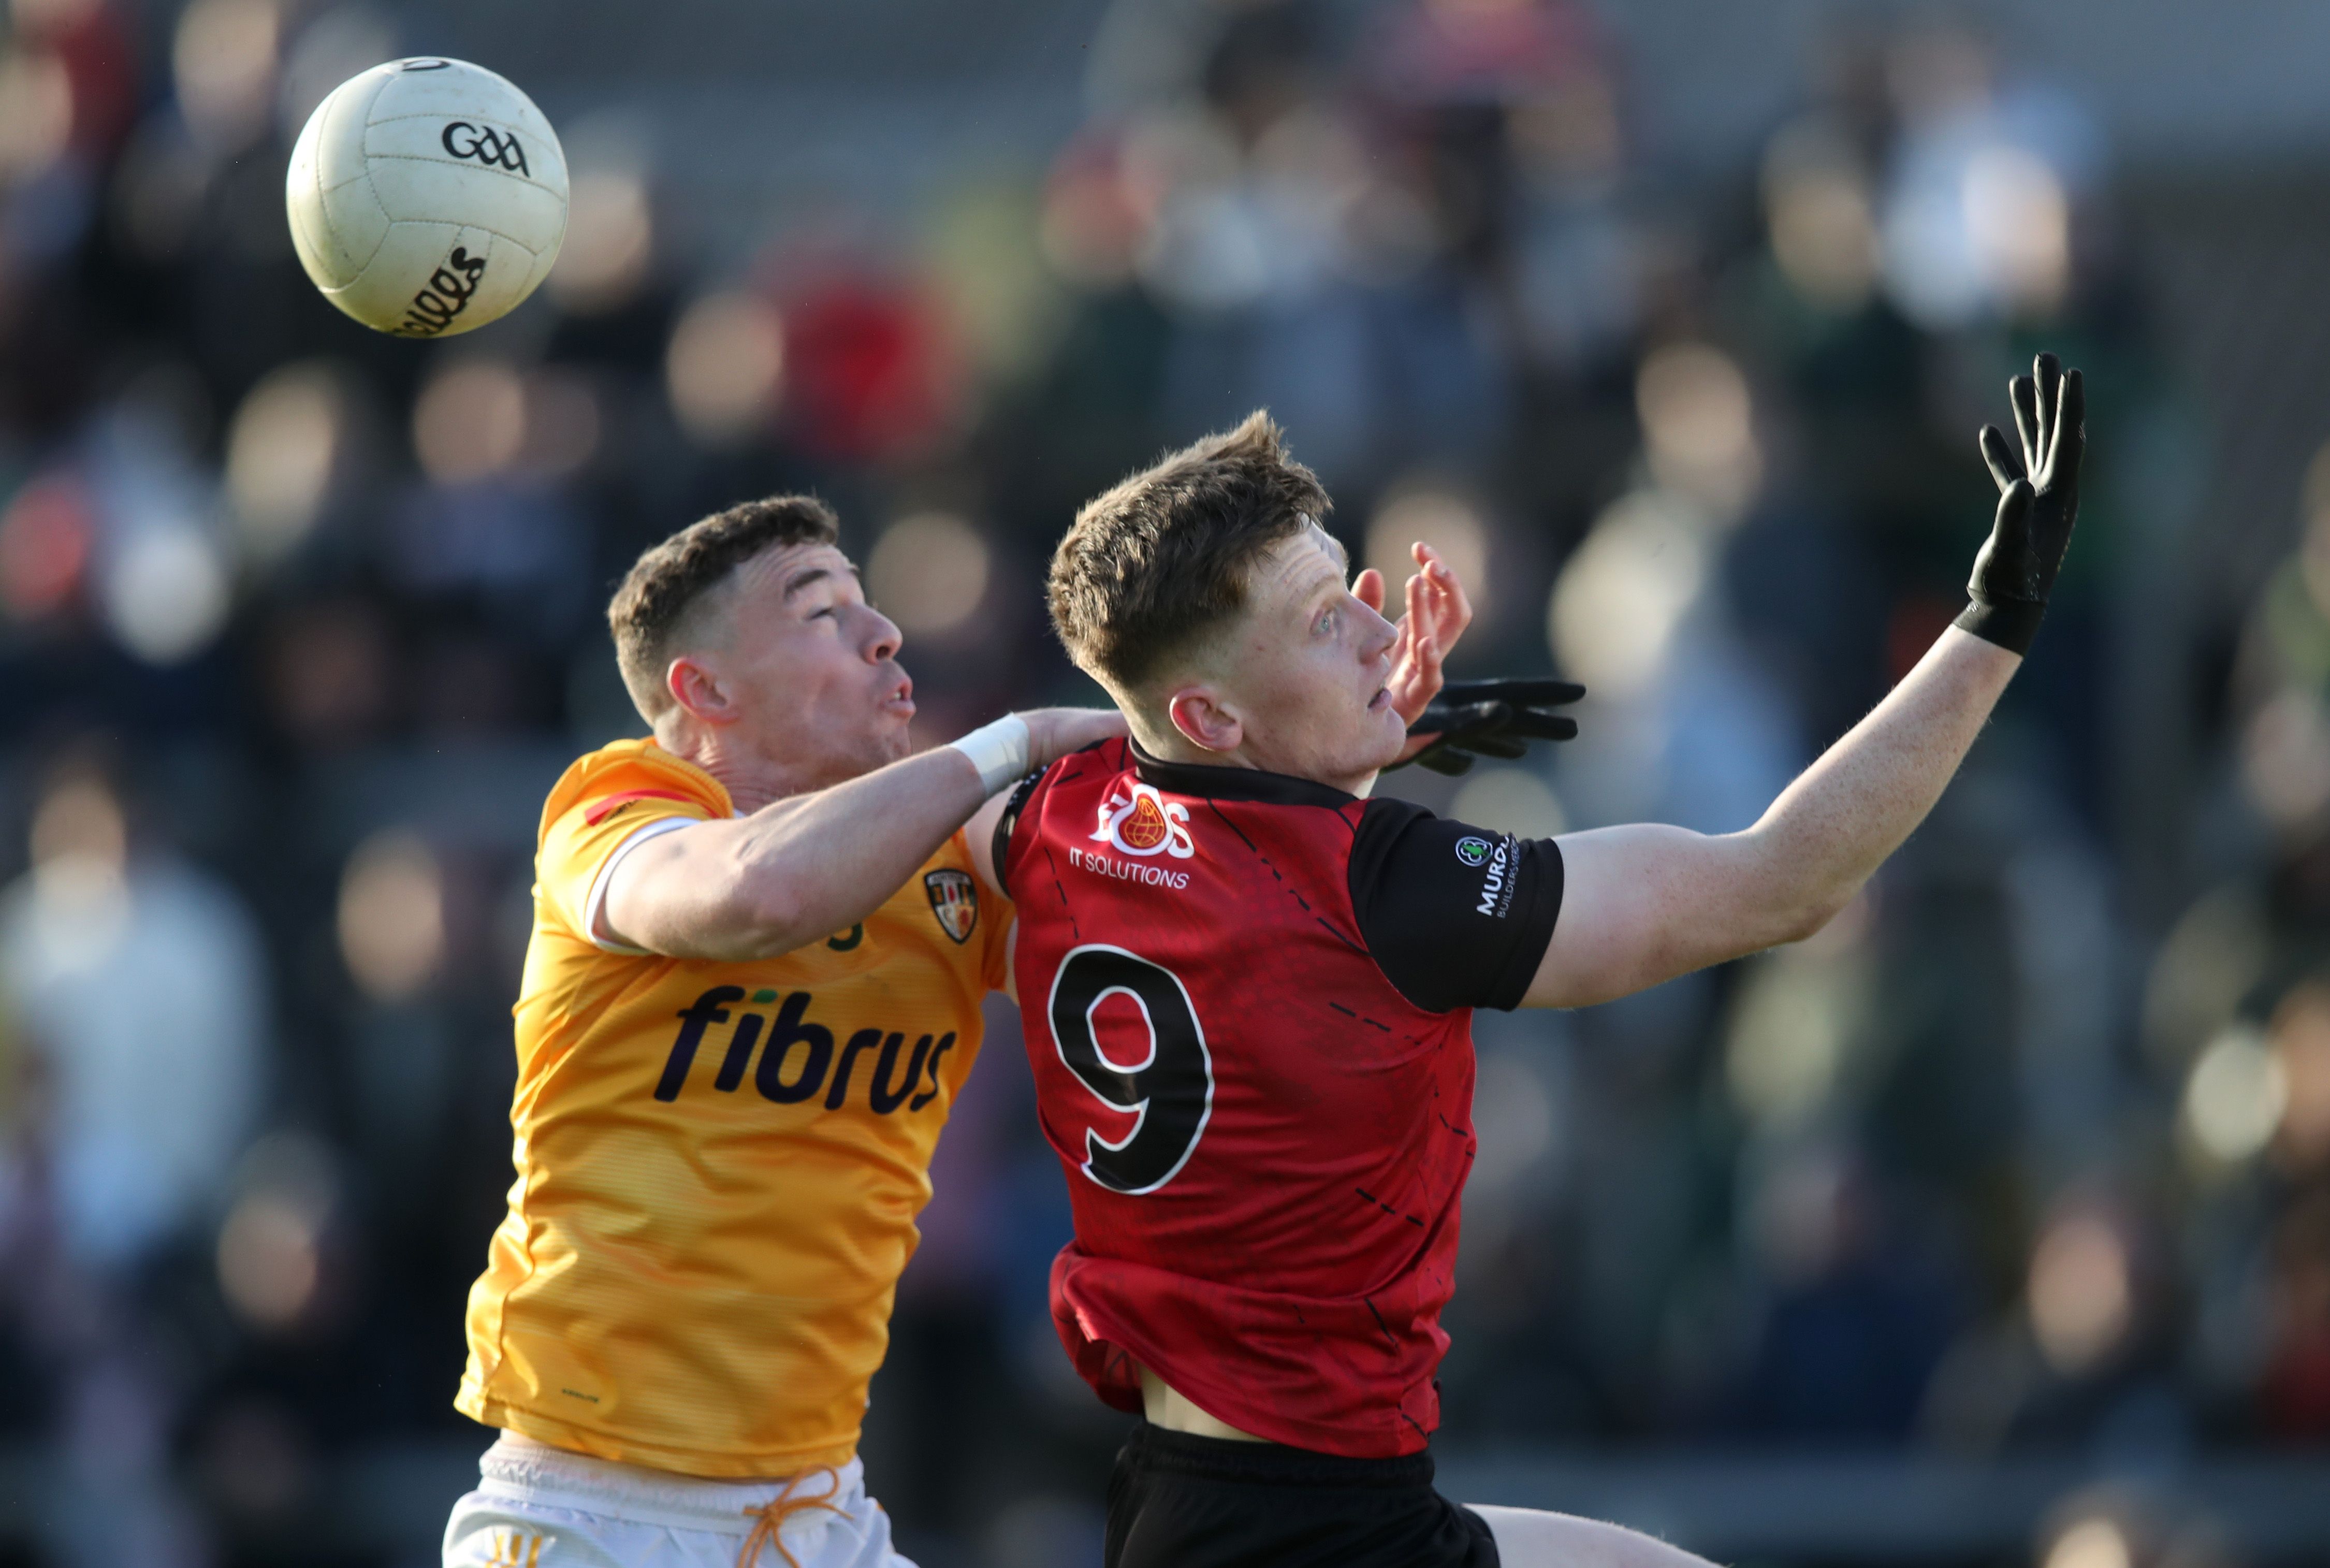 Antrim and Down have been. kept apart in the group stages of the Tailteann Cup 